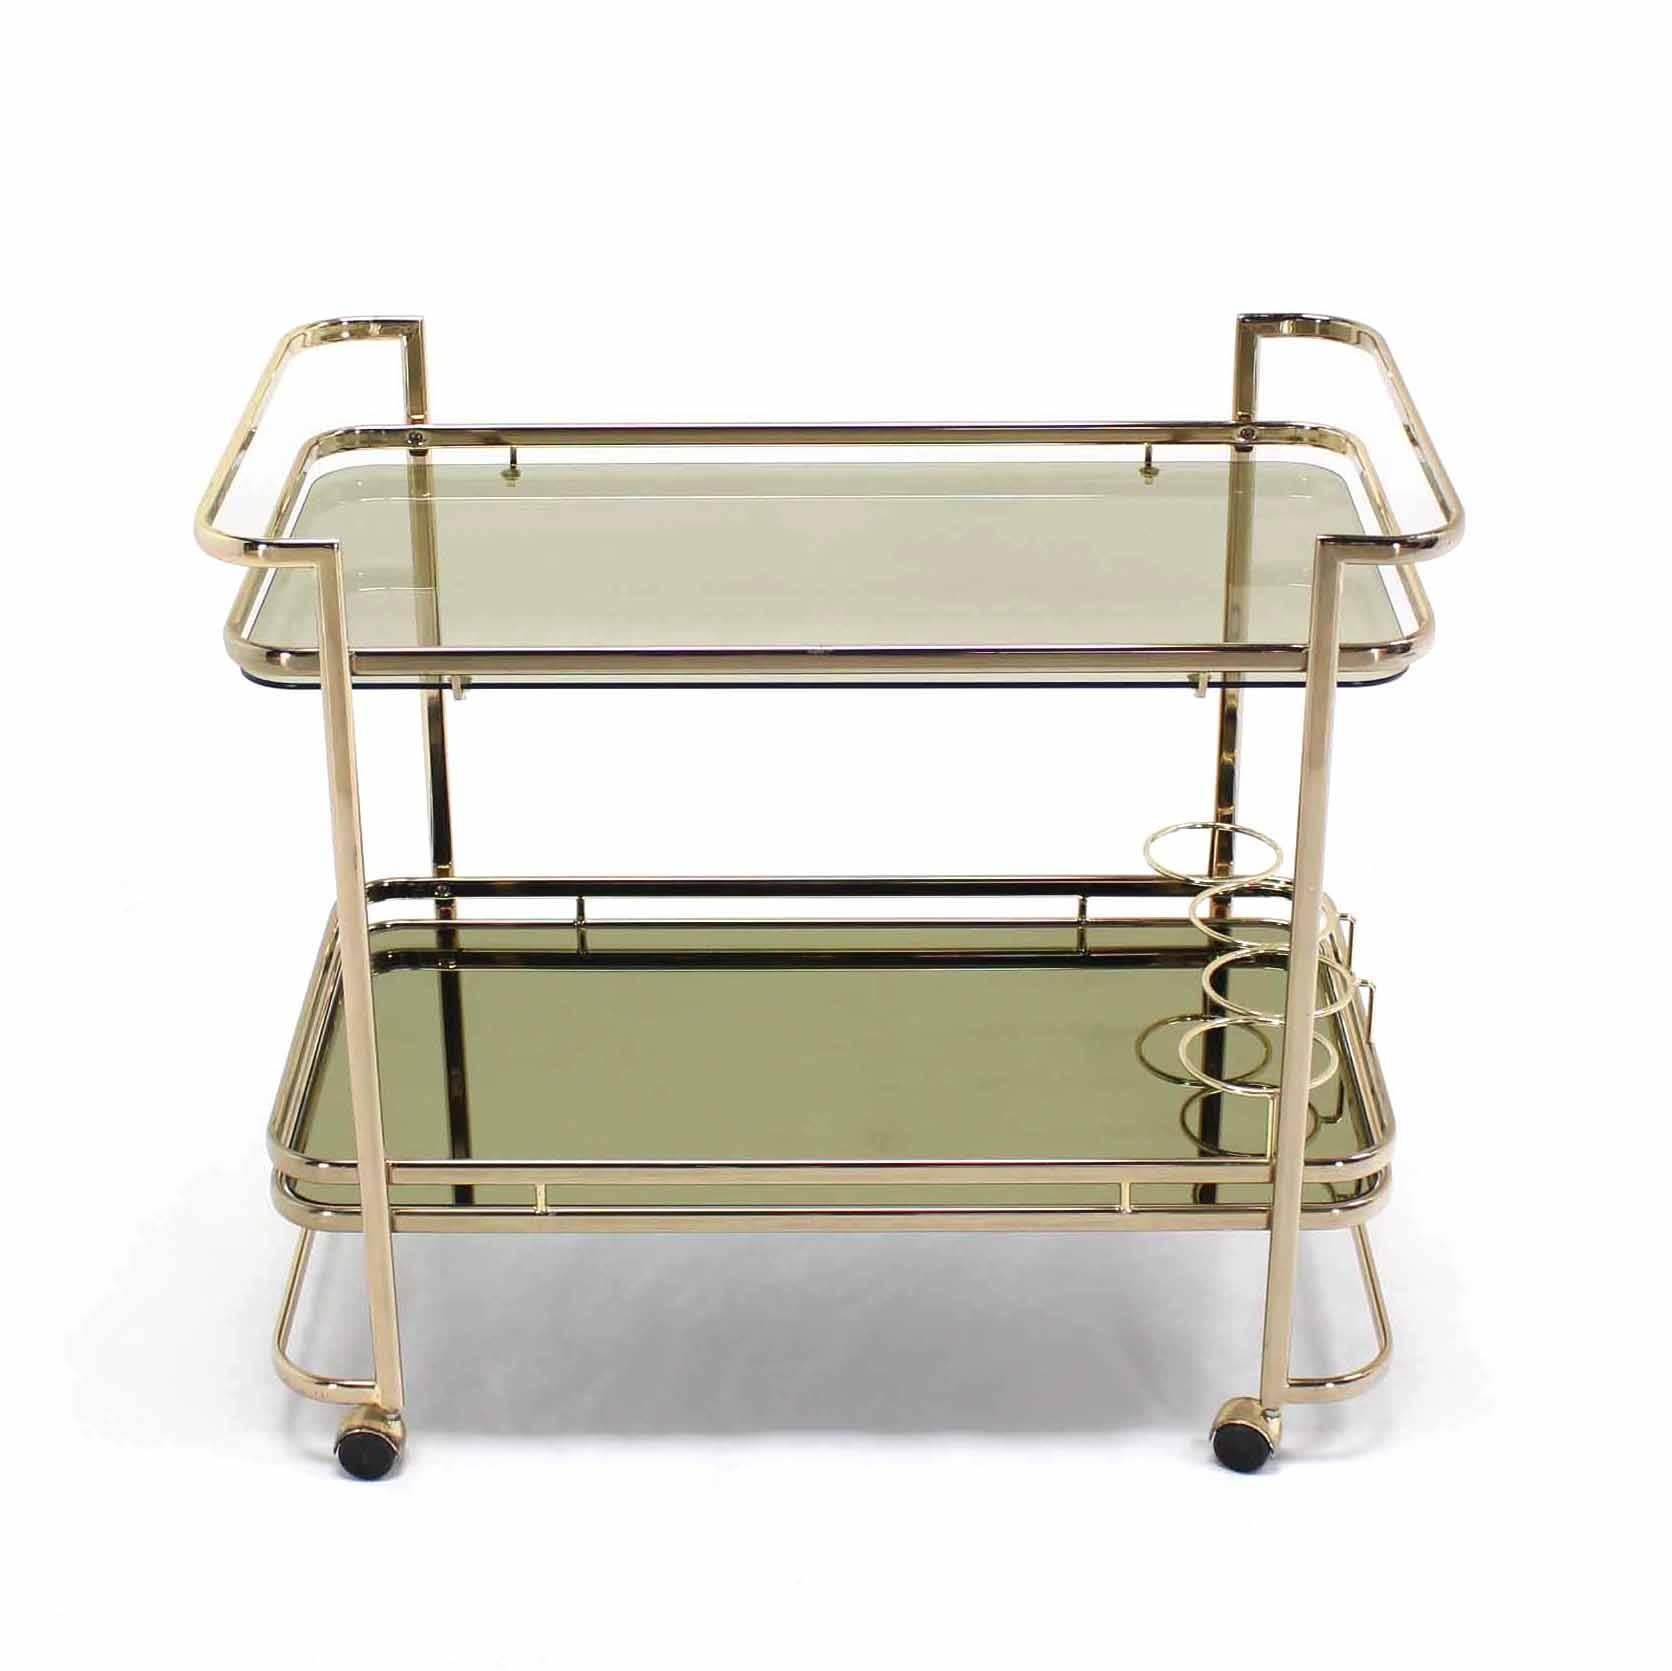 Very nice toned glass gold finish mid century modern cart. Welded and polished assembly/design.